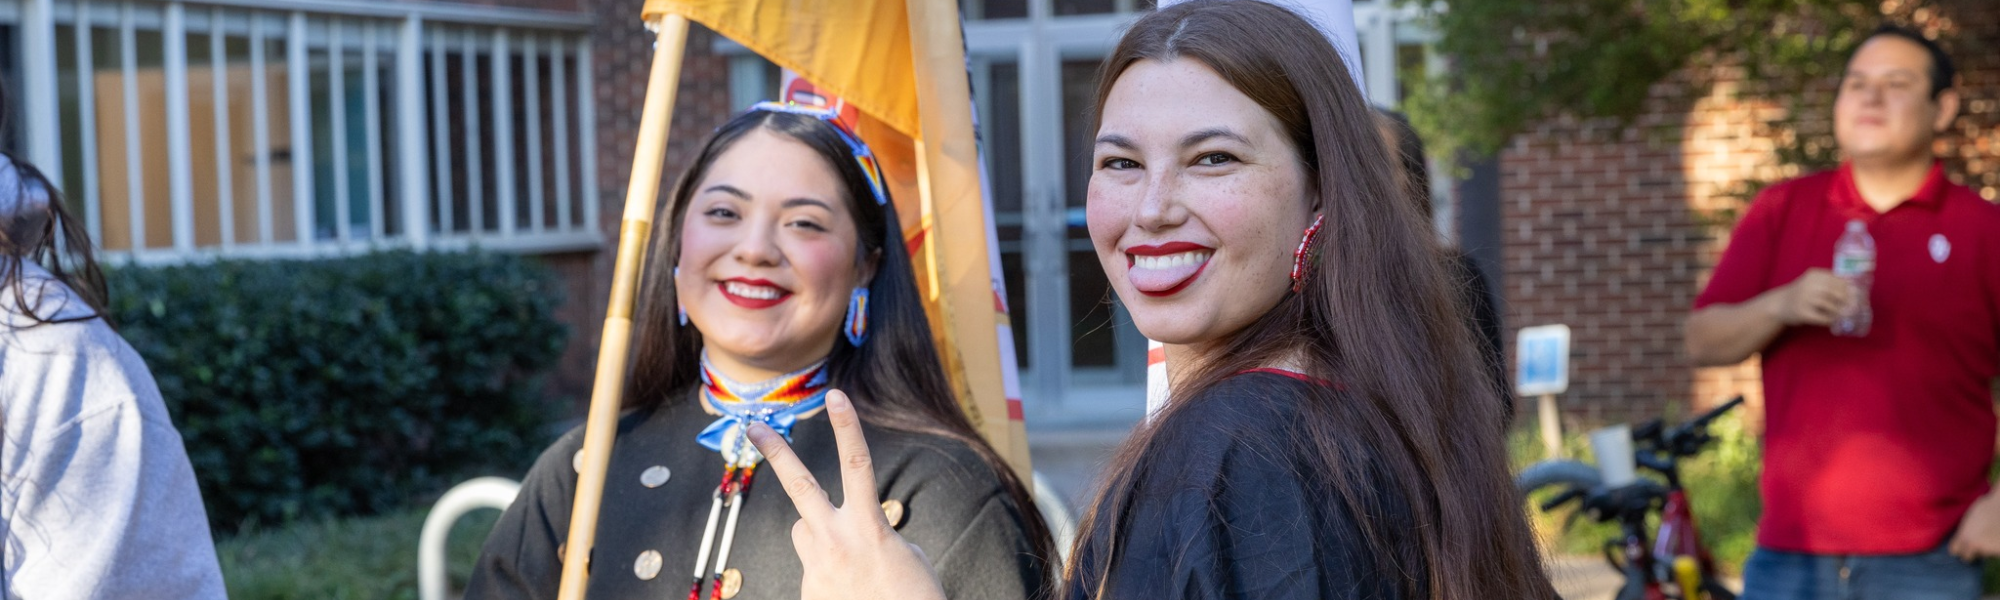 Two students in traditional Native American clothing smiling.